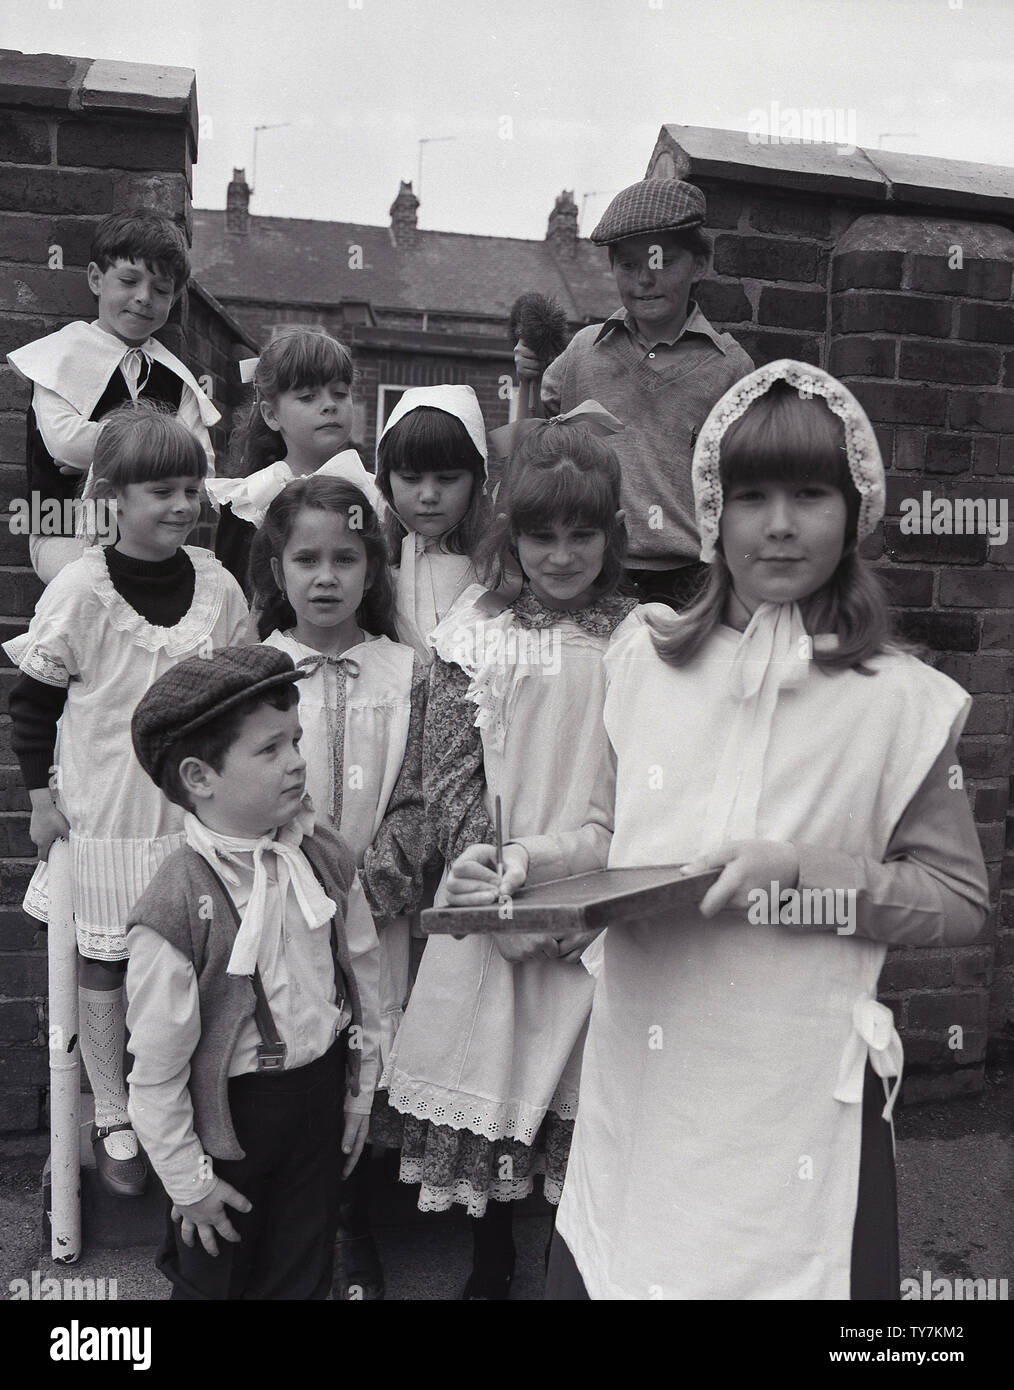 1980s, village school children outside dressed up in the clothes that there counterparts would have worn in Victorian times, Yorkshire, England, UK. The Victorian schoolgirl would wear a white cotton apron, often trimed with lace, worn over normal clothes as a means of protection. In addition, some girls would have worn a bonnet over their hair. Stock Photo